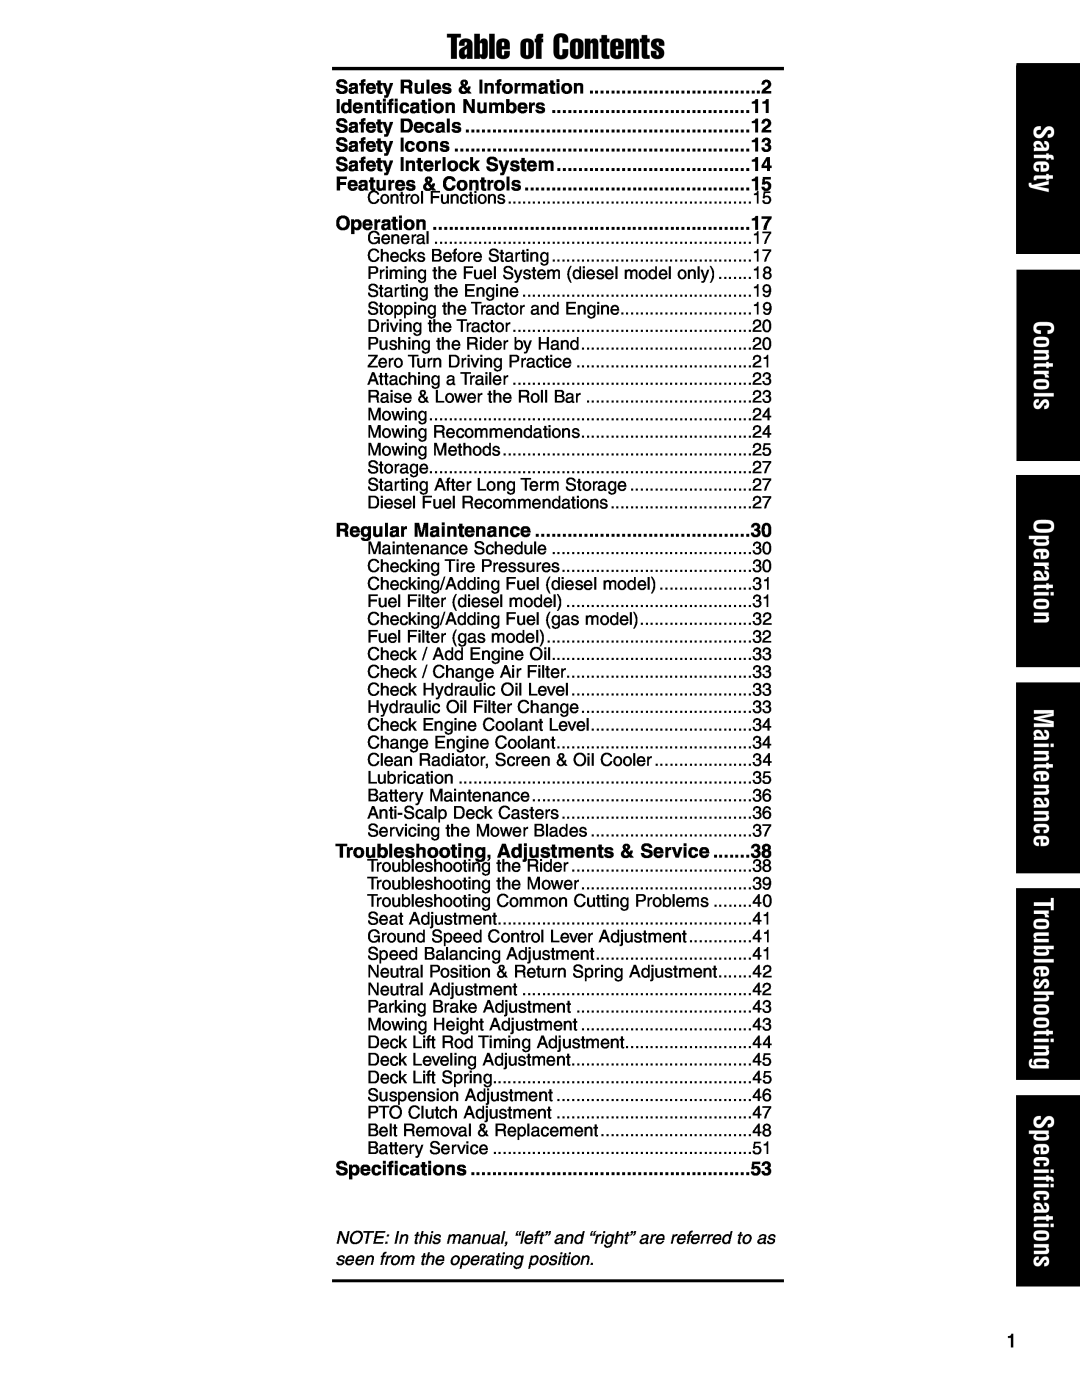 Ferris Industries 5901179 manual Safety Controls Operation, Maintenance Troubleshooting Specifications, Table of Contents 